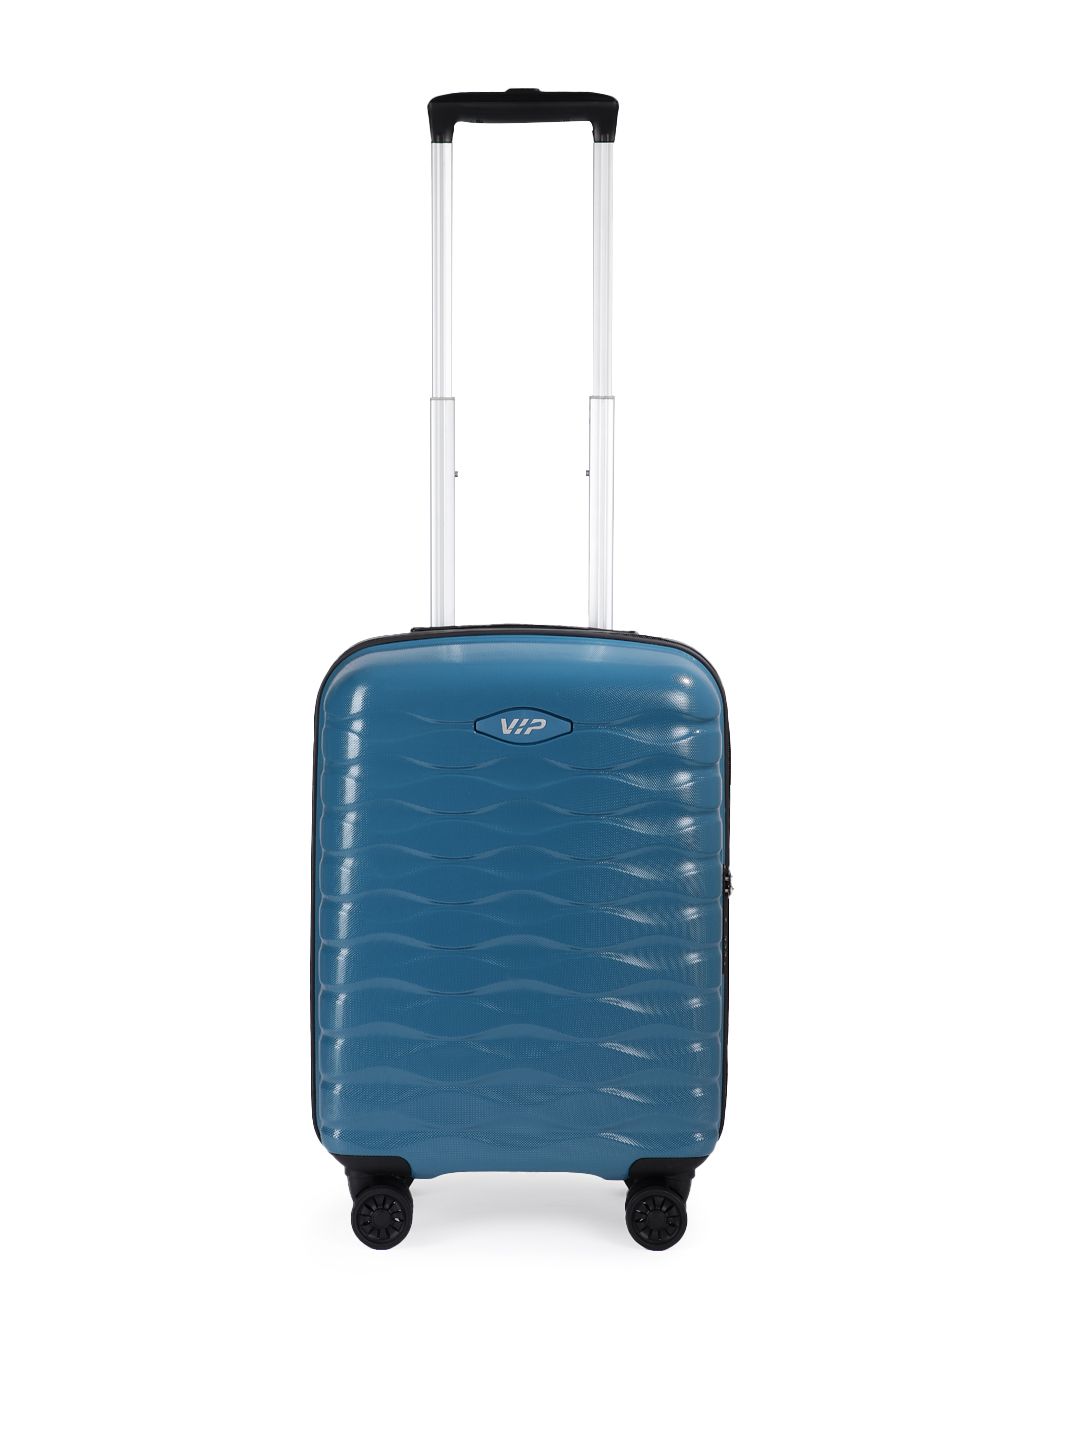 VIP Blue Foxtrot Cabin Trolley Suitcase Price in India